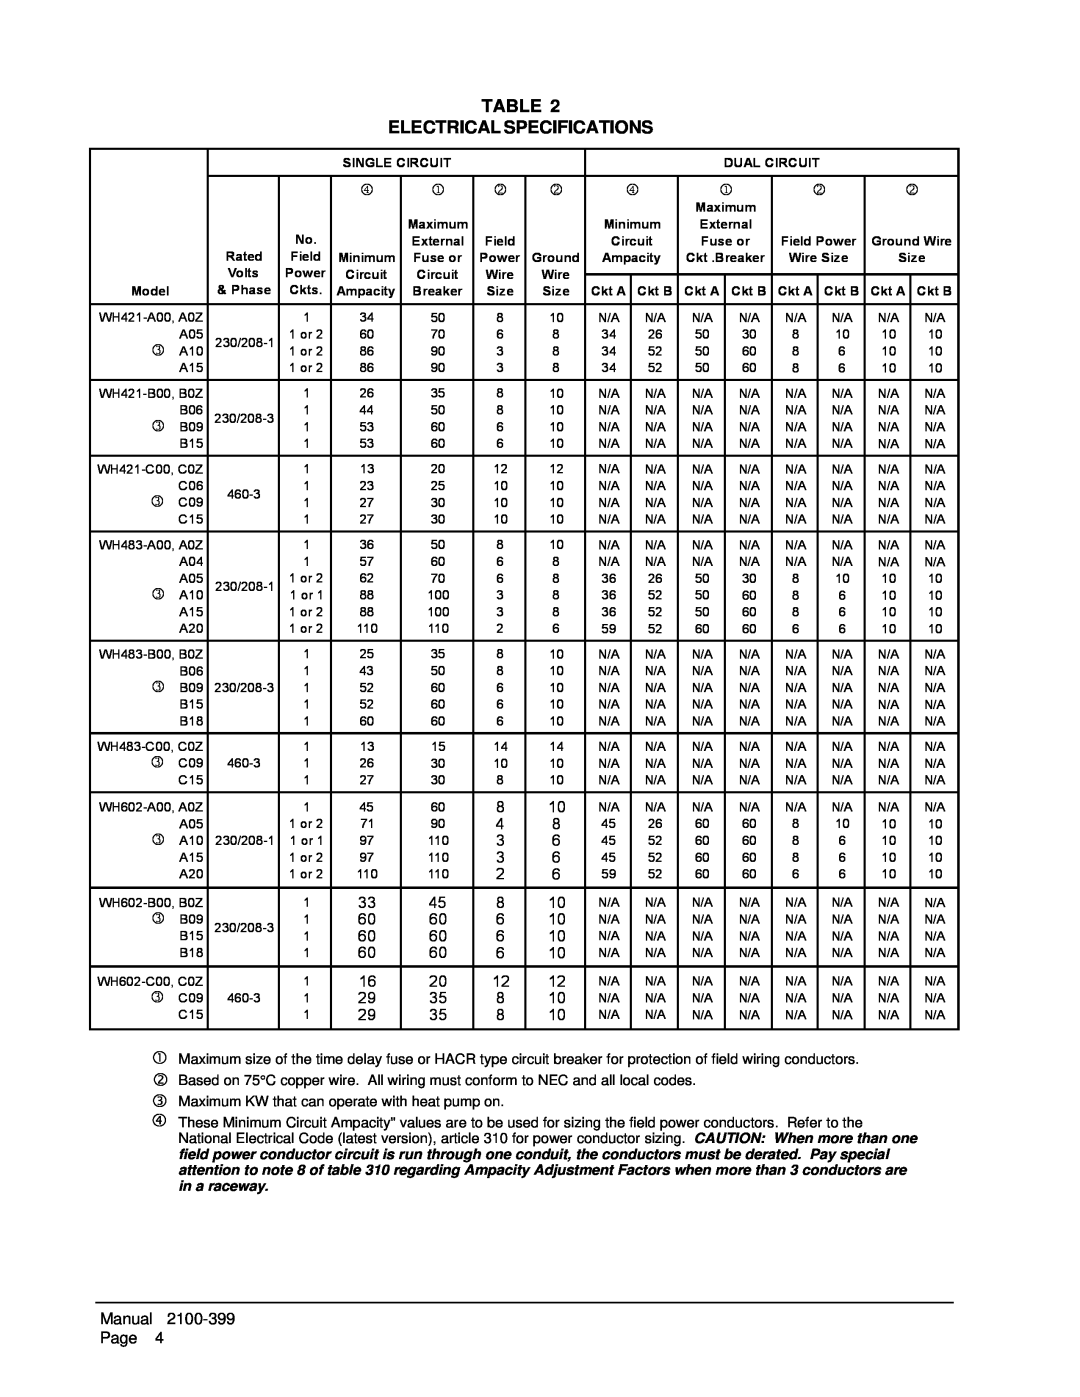 Bard WH602, WH483, WH421 installation instructions Table Electrical Specifications 